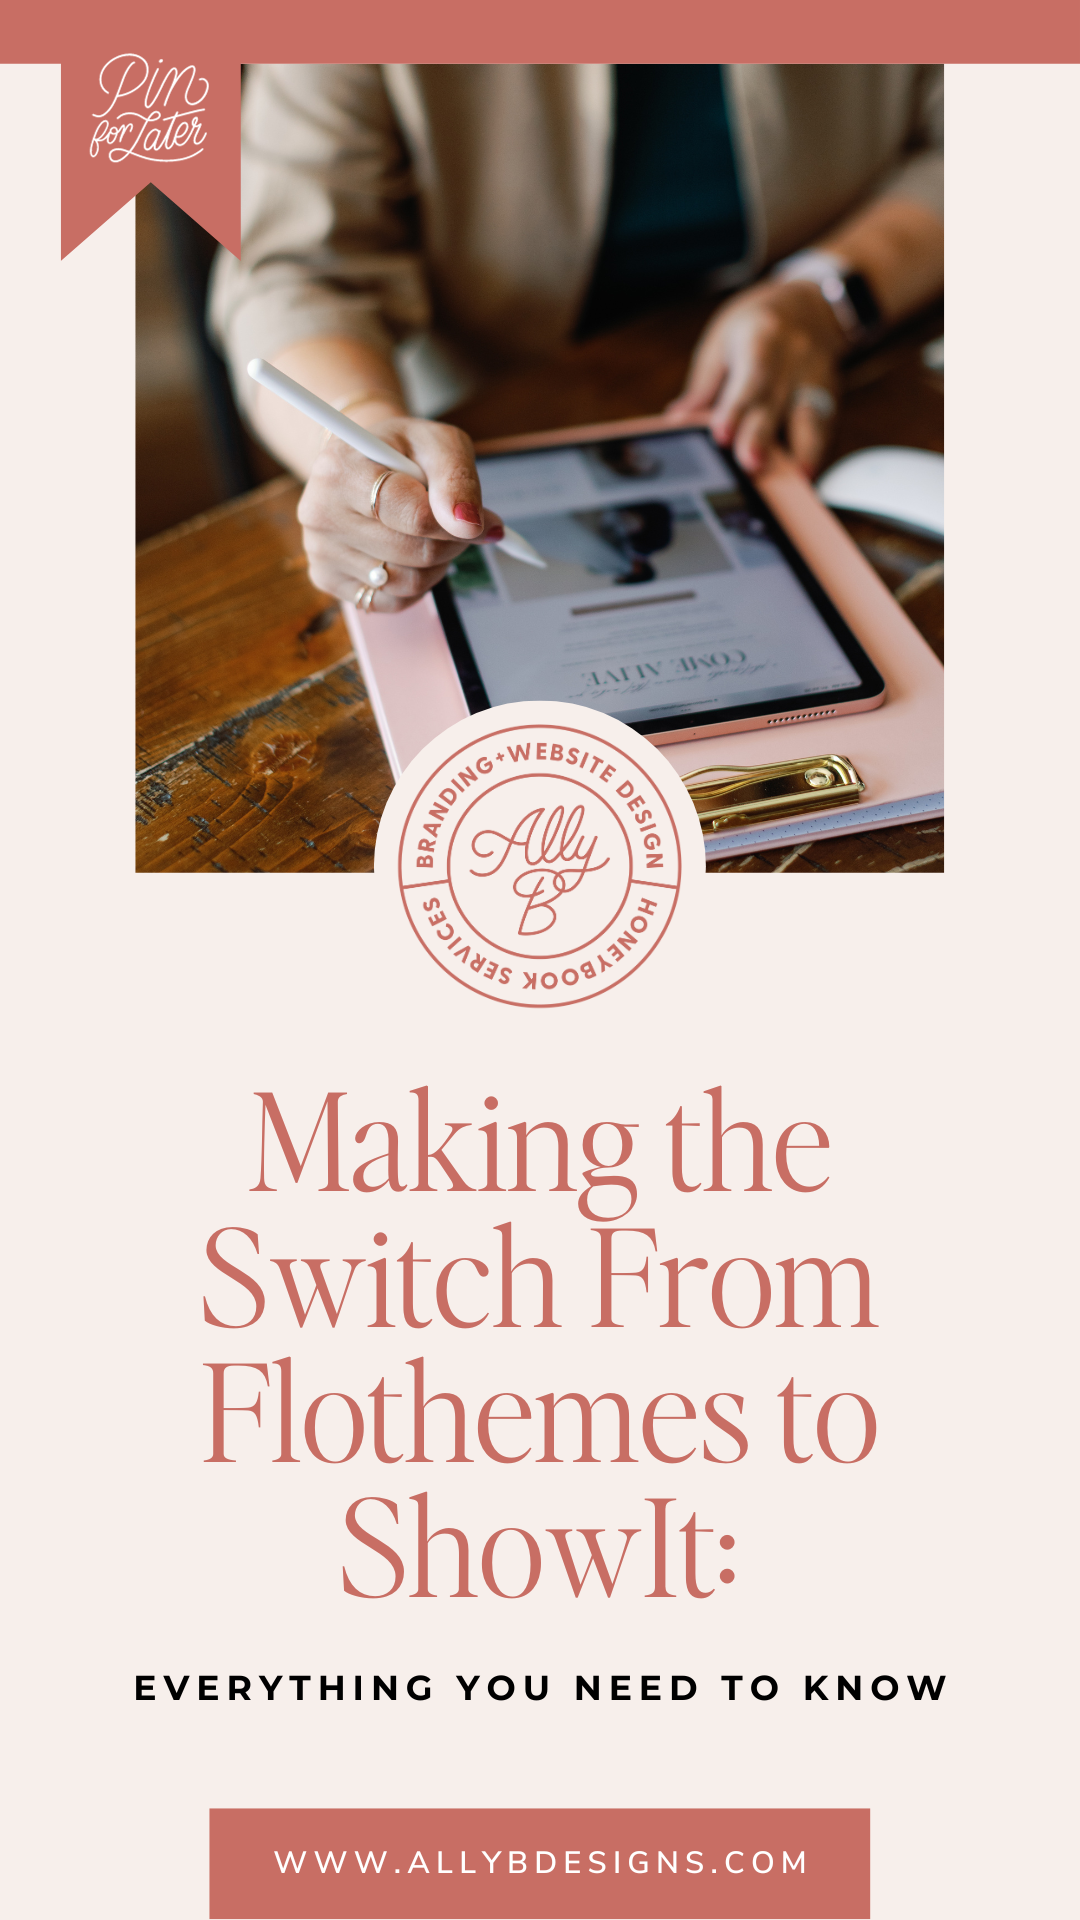 Making the Switch from Flothemes to Showit: Everything you need to know.